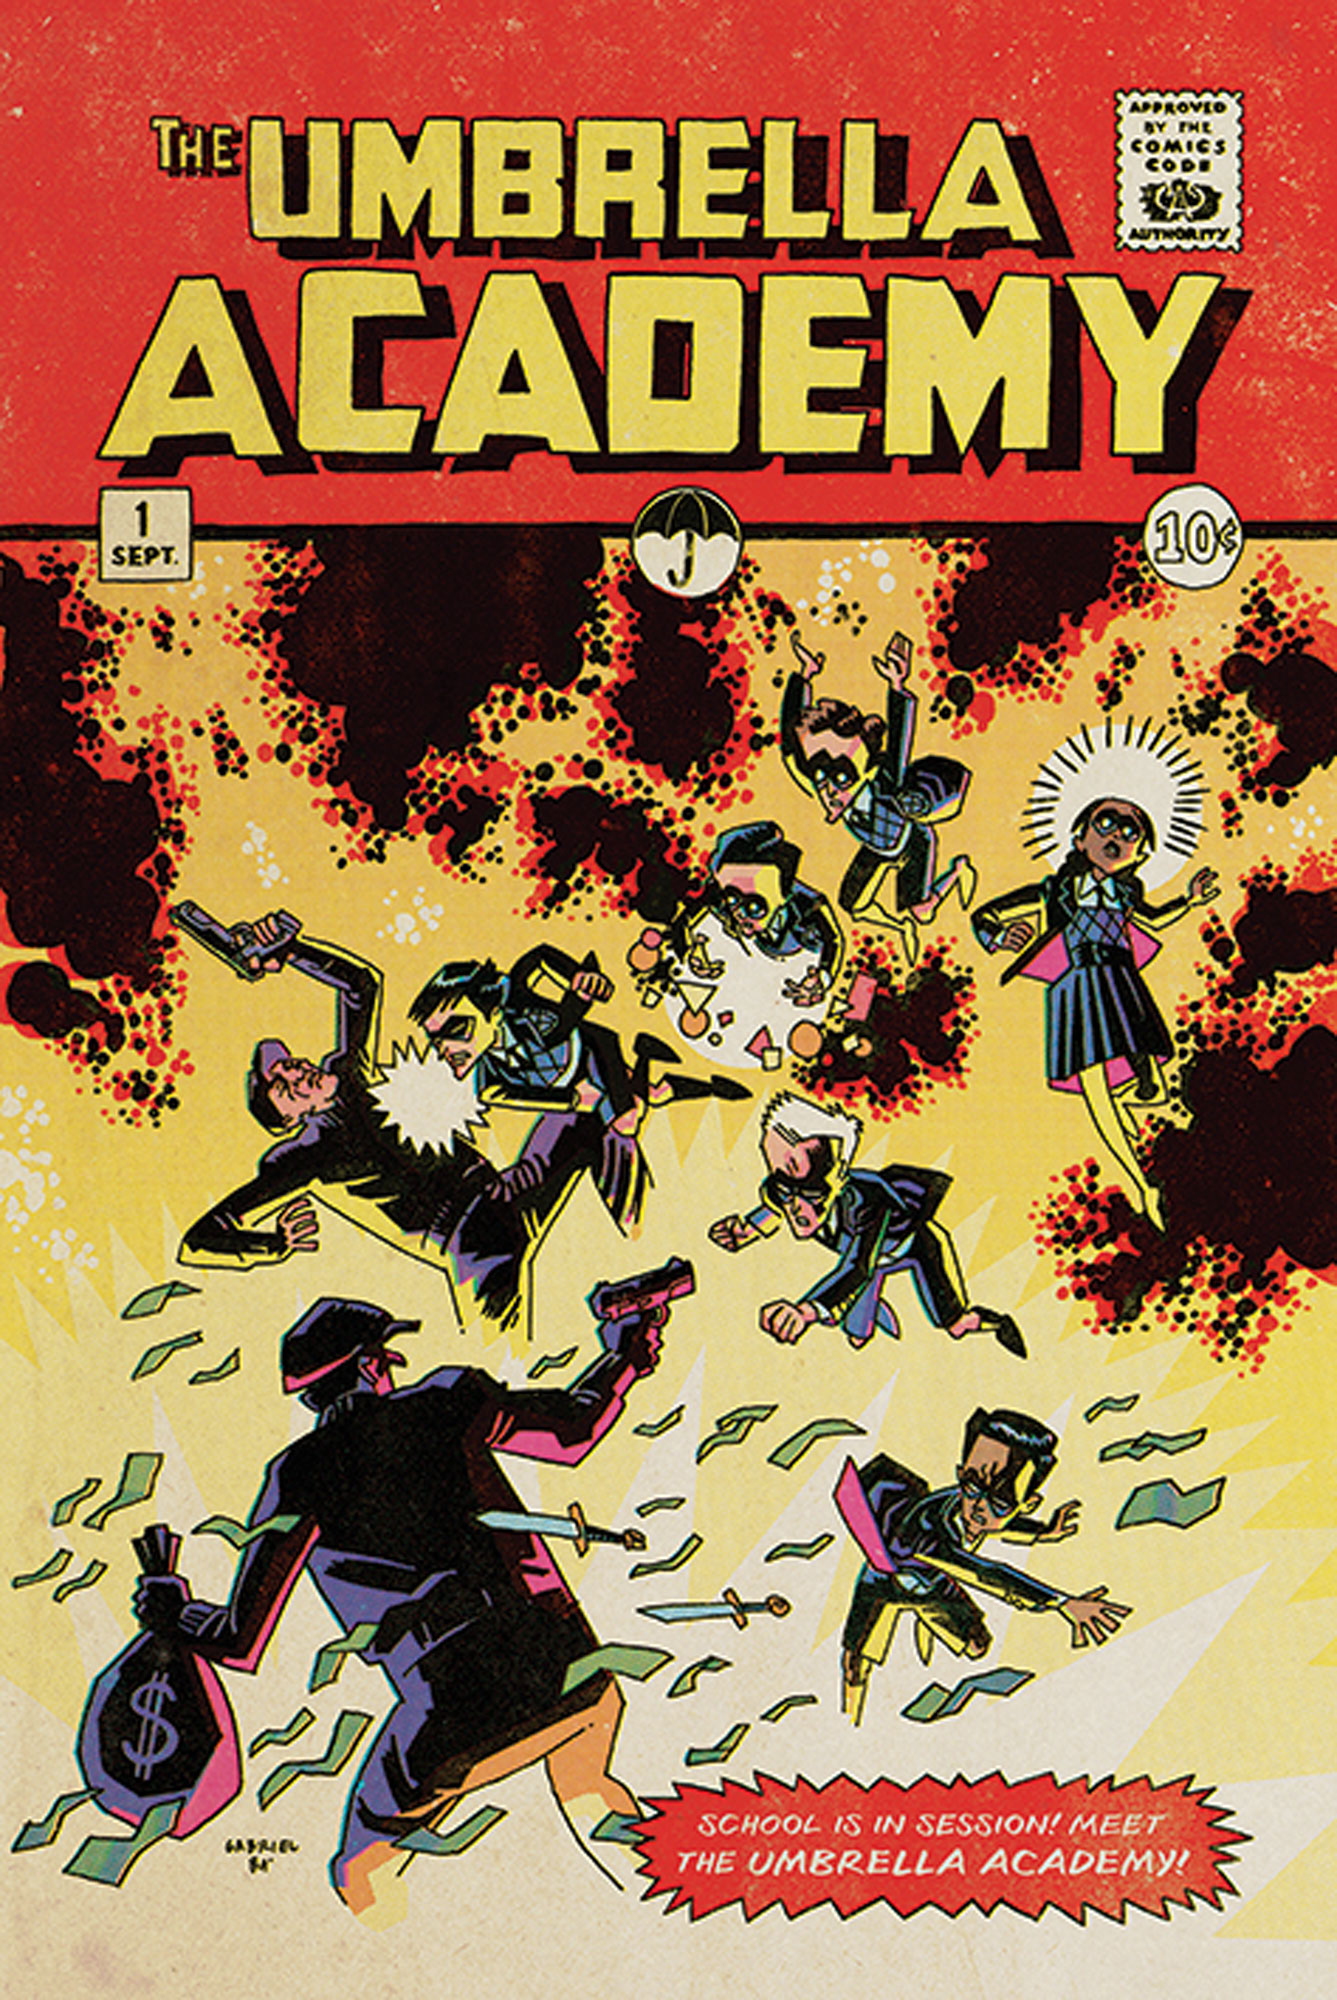 Umbrella Academy, The - School is Session in